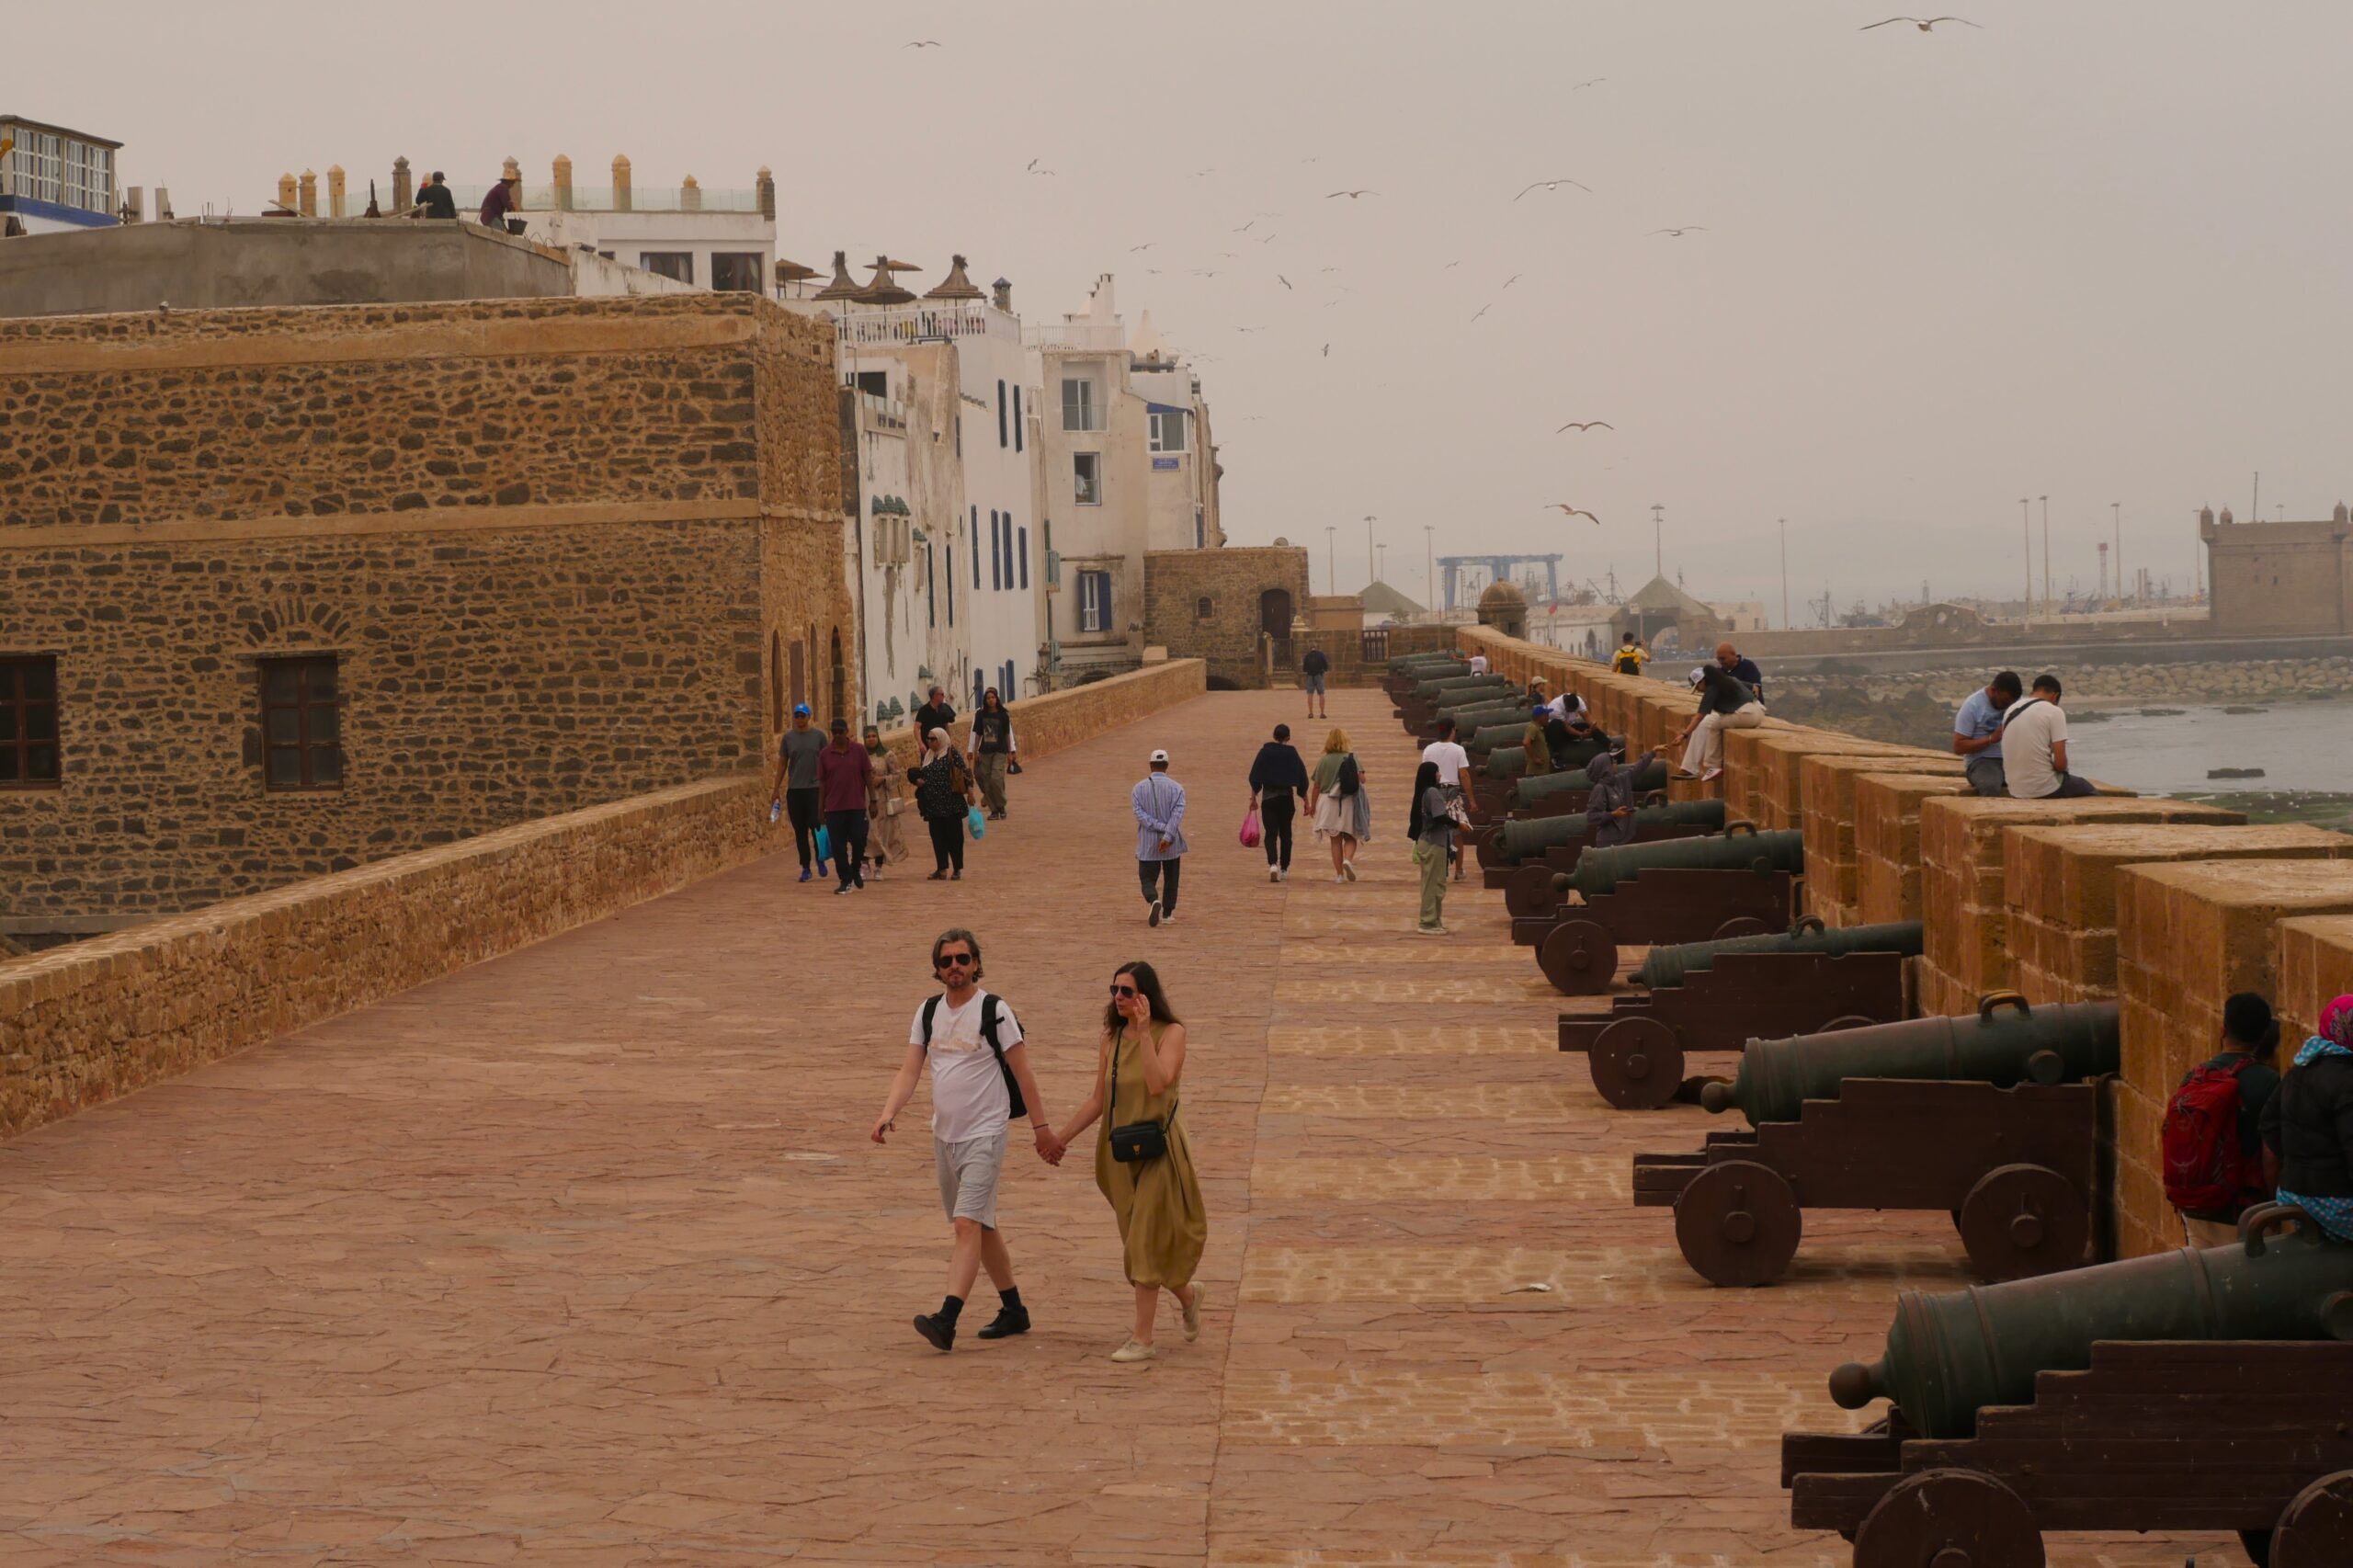 Moroccan cities between the past and the present, Essaouira is the city of wind and tourism